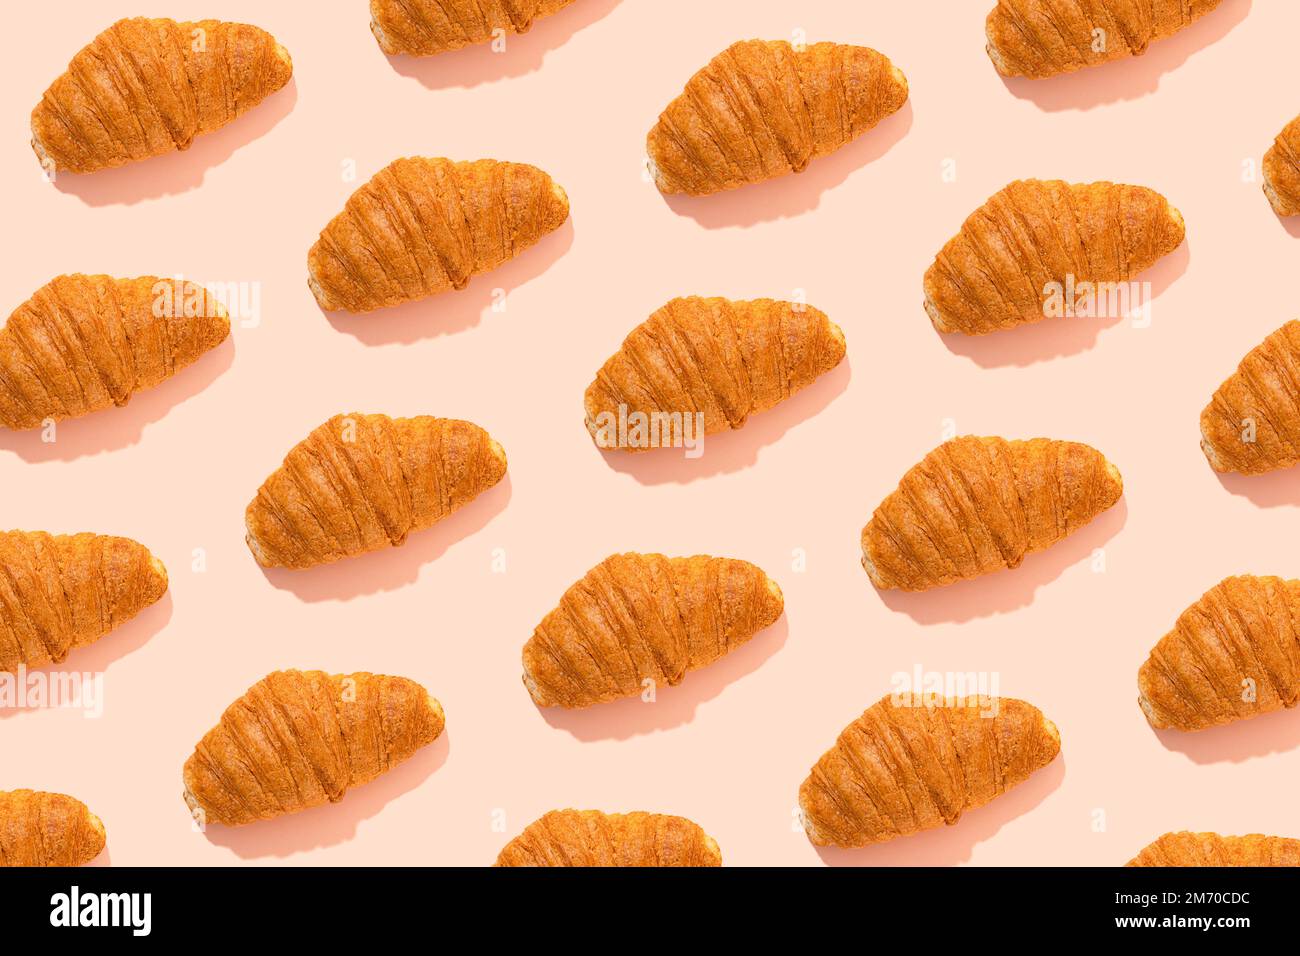 Croissant pattern over pink background Stock Photo